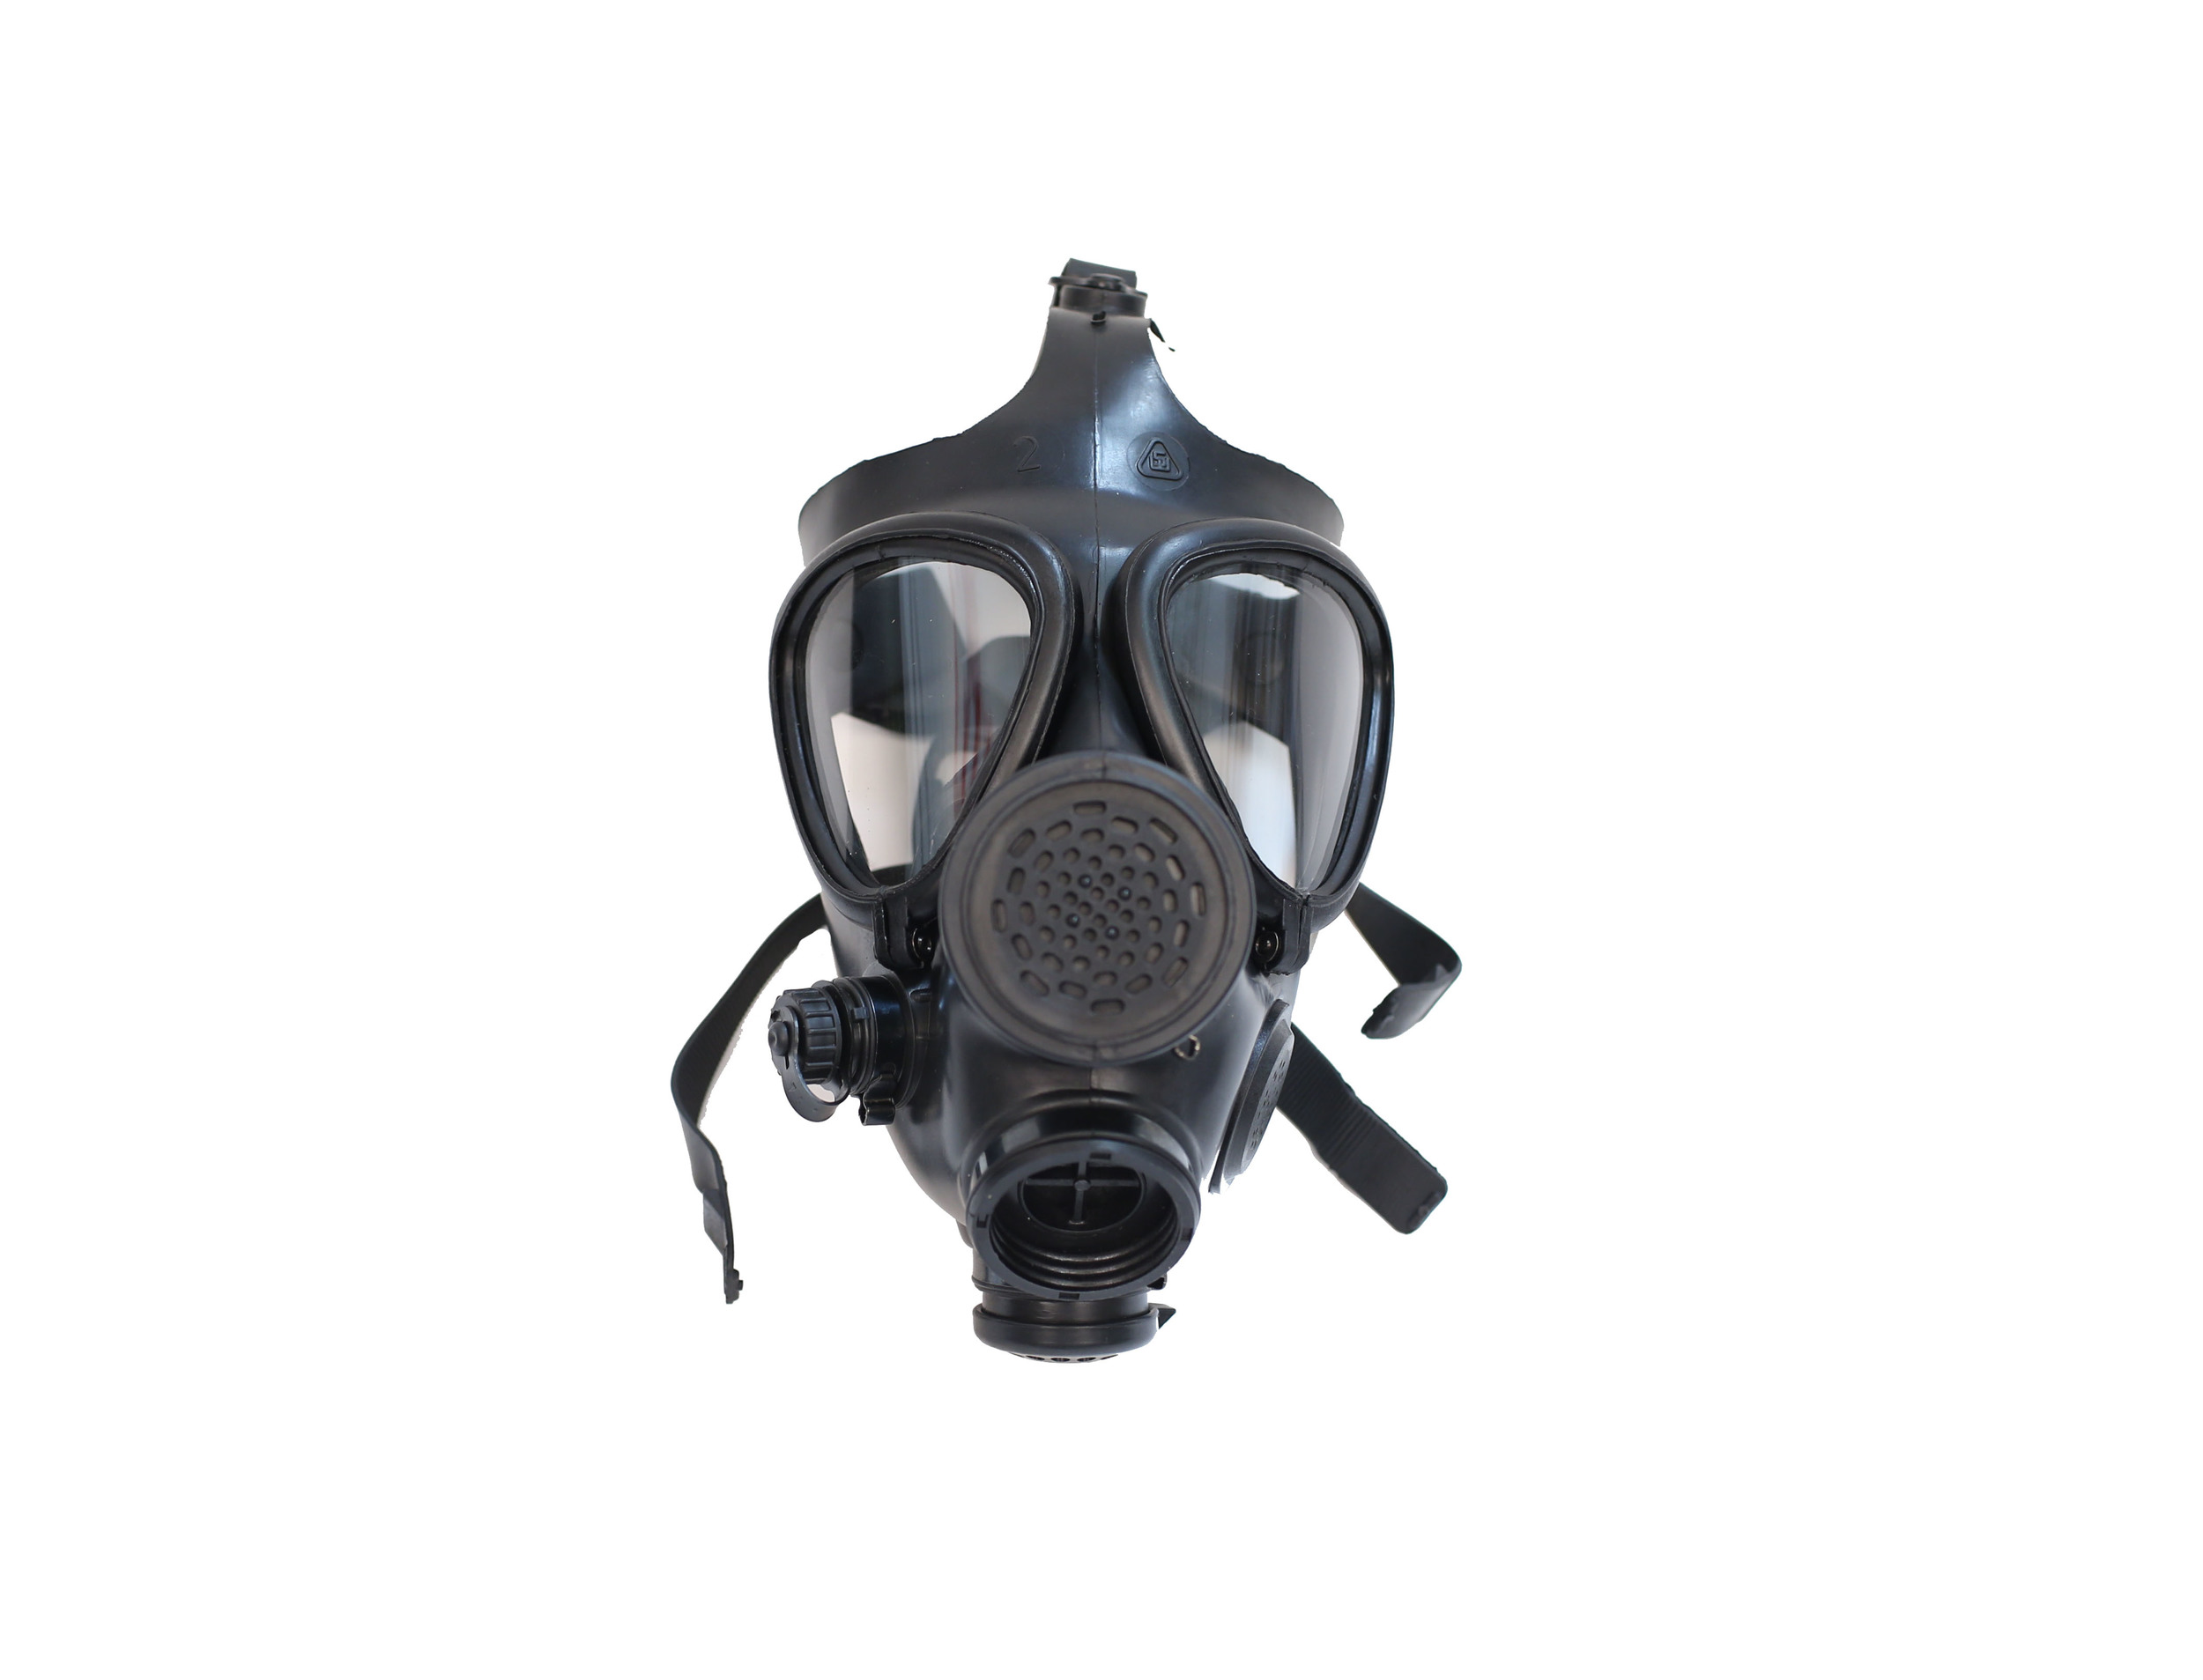 Filter & Voicemitter- FREE Shipping ISRAELI M15 GAS MASK w/ Drinking Straw NEW 